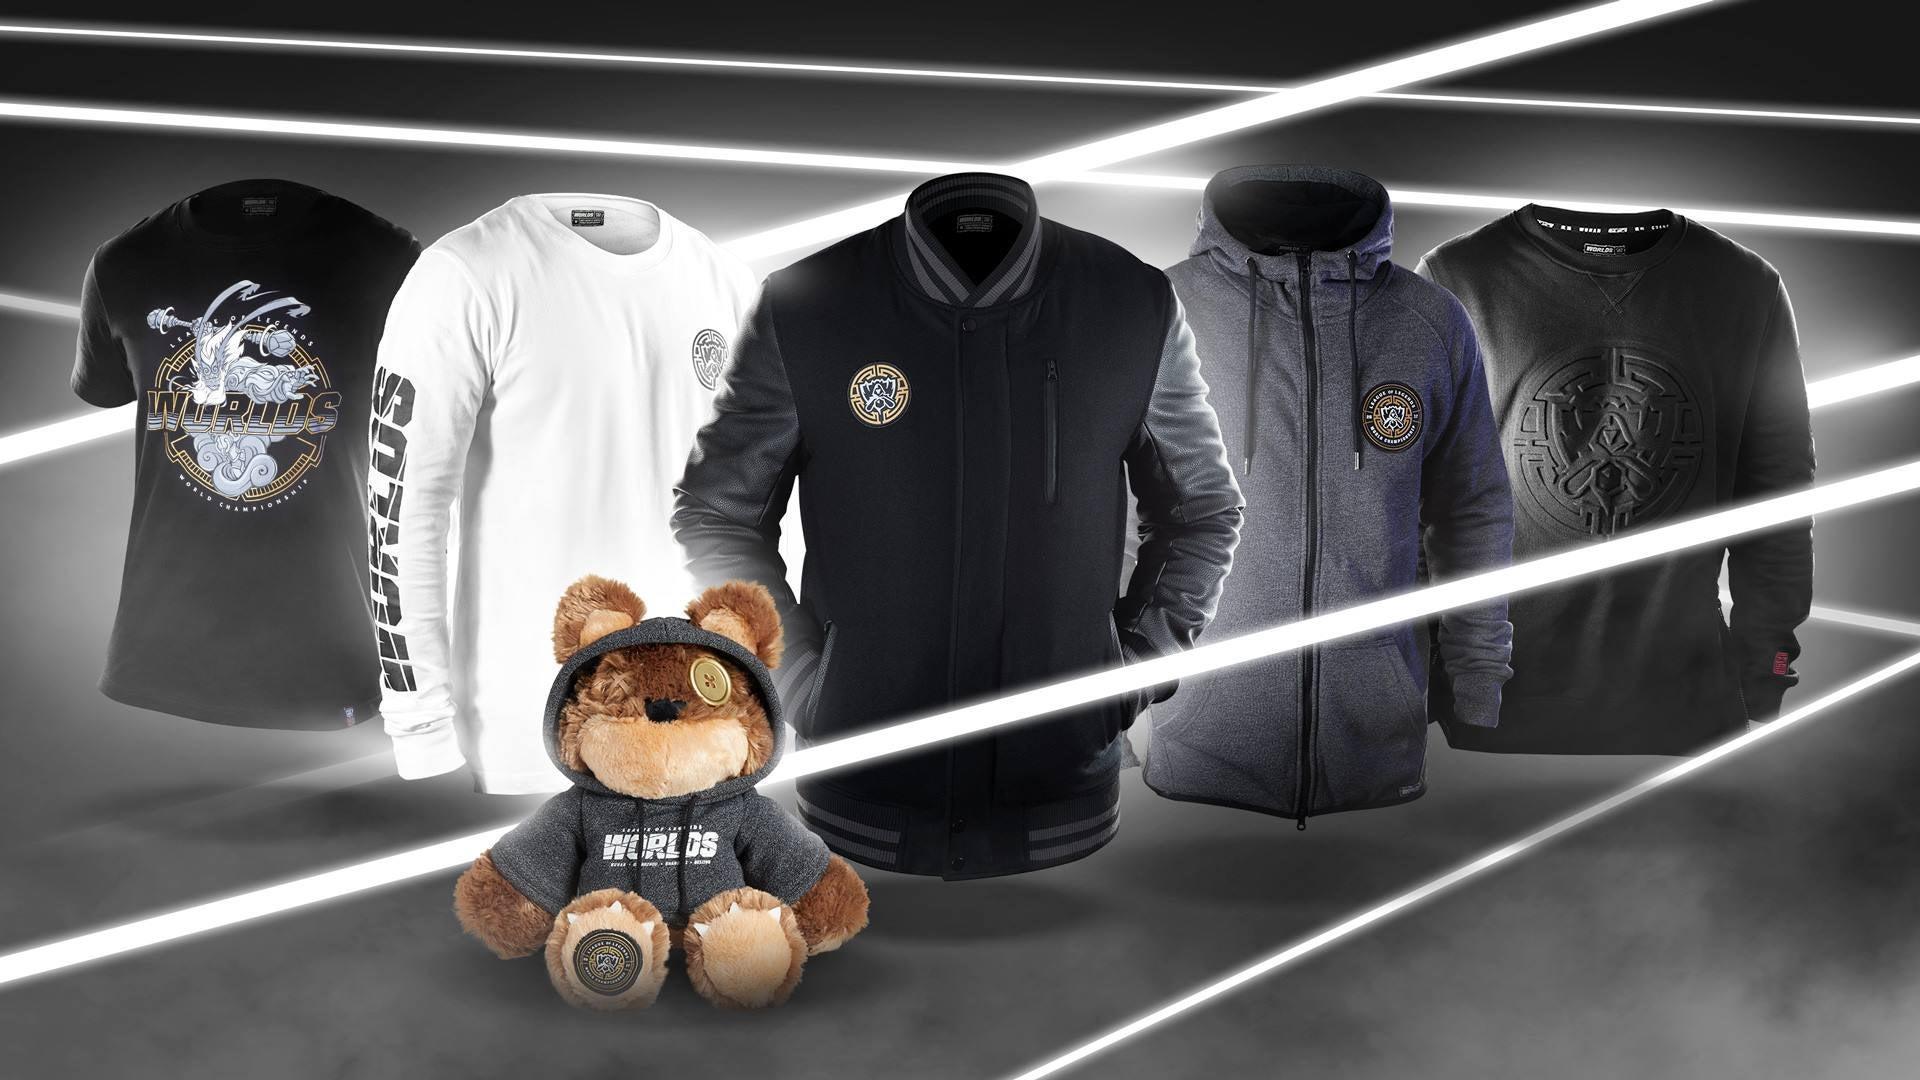 League of Legends Worlds 2021 clothing collection - The Gaming Wear